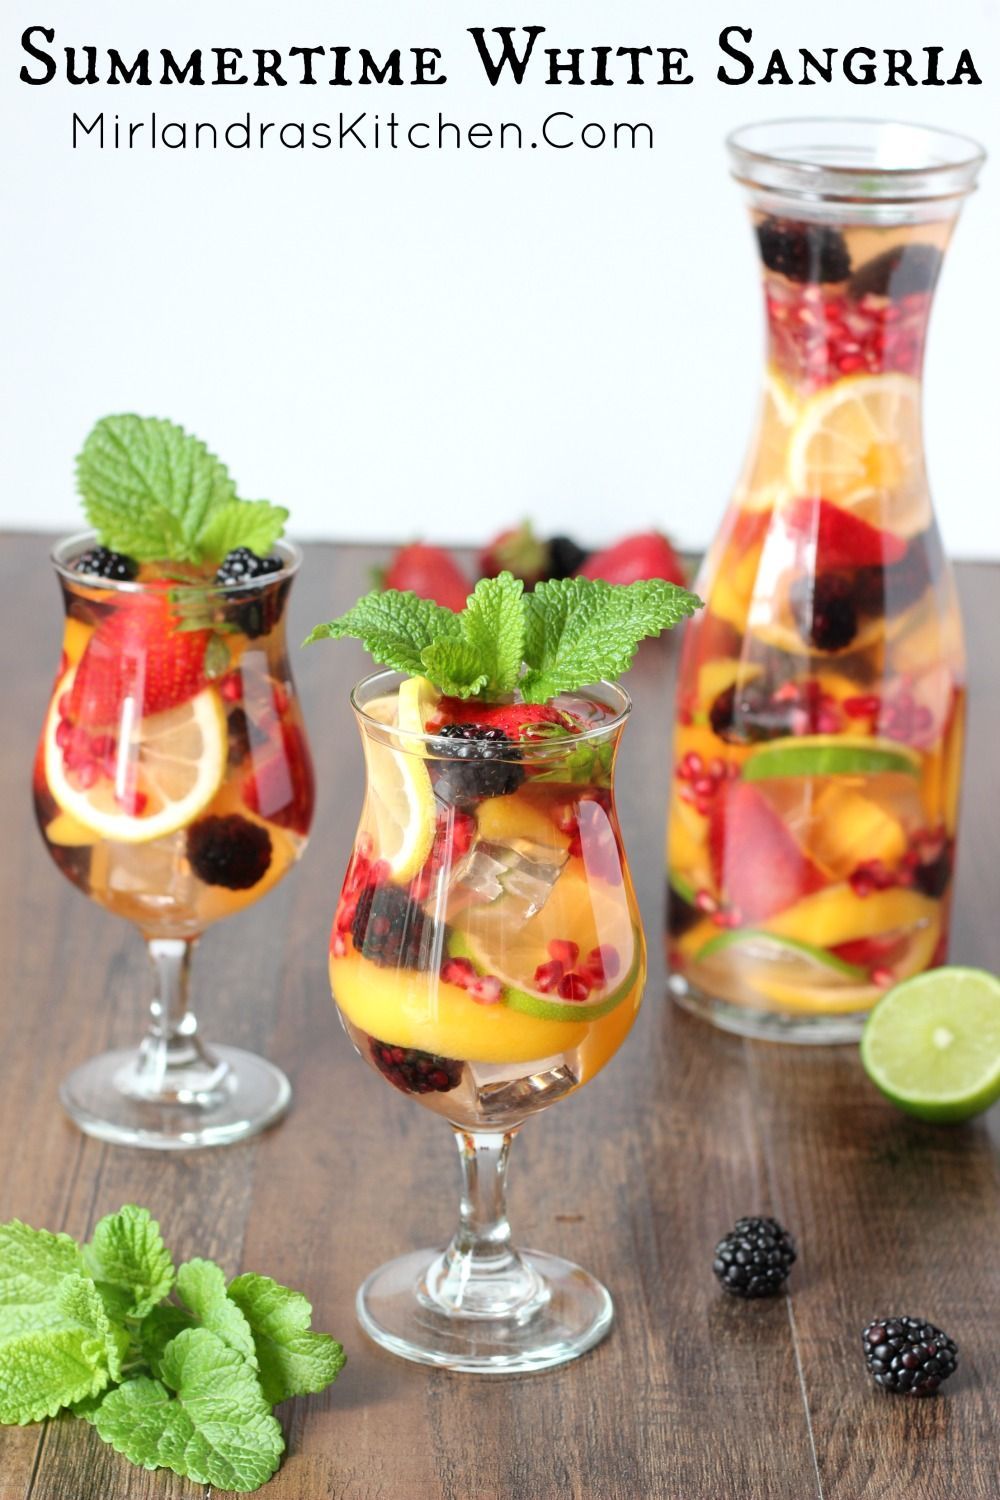 This white sangria is the perfect sweet, fruity, wine drink to serve at a BBQ or cool off with all summer long.  I can never